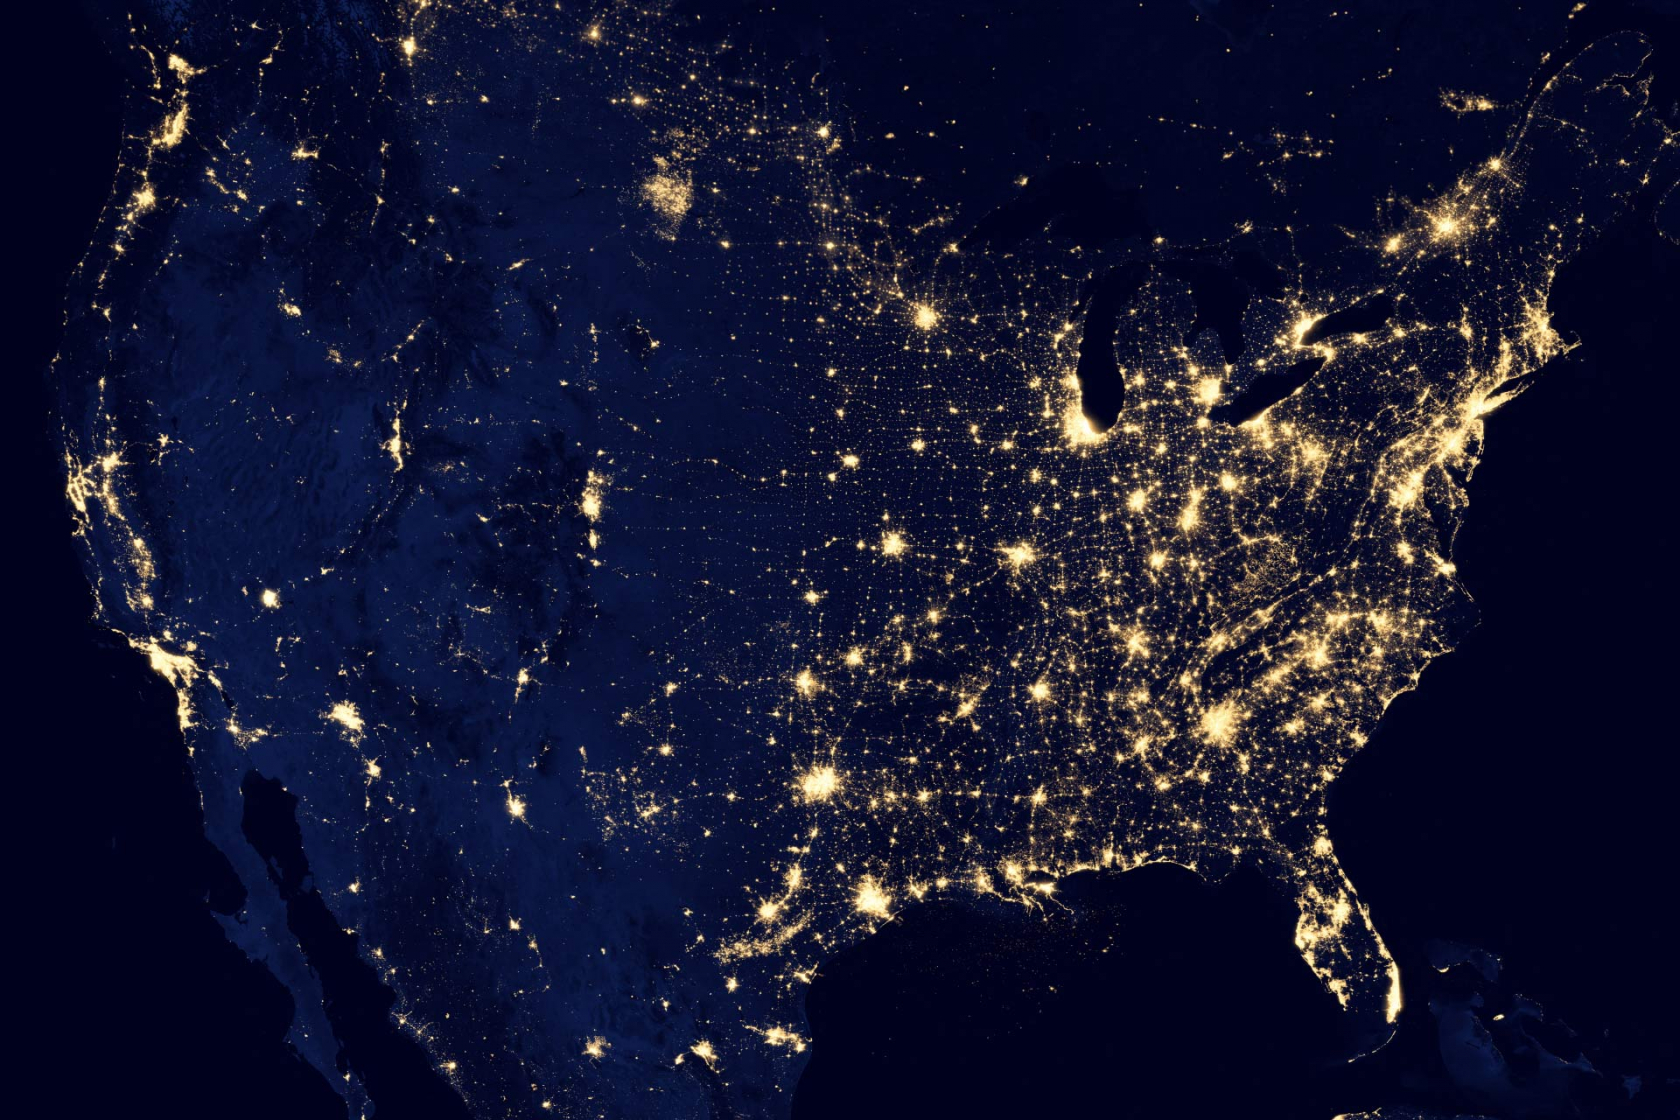 The switch to outdoor LEDs has resulted in even more light pollution